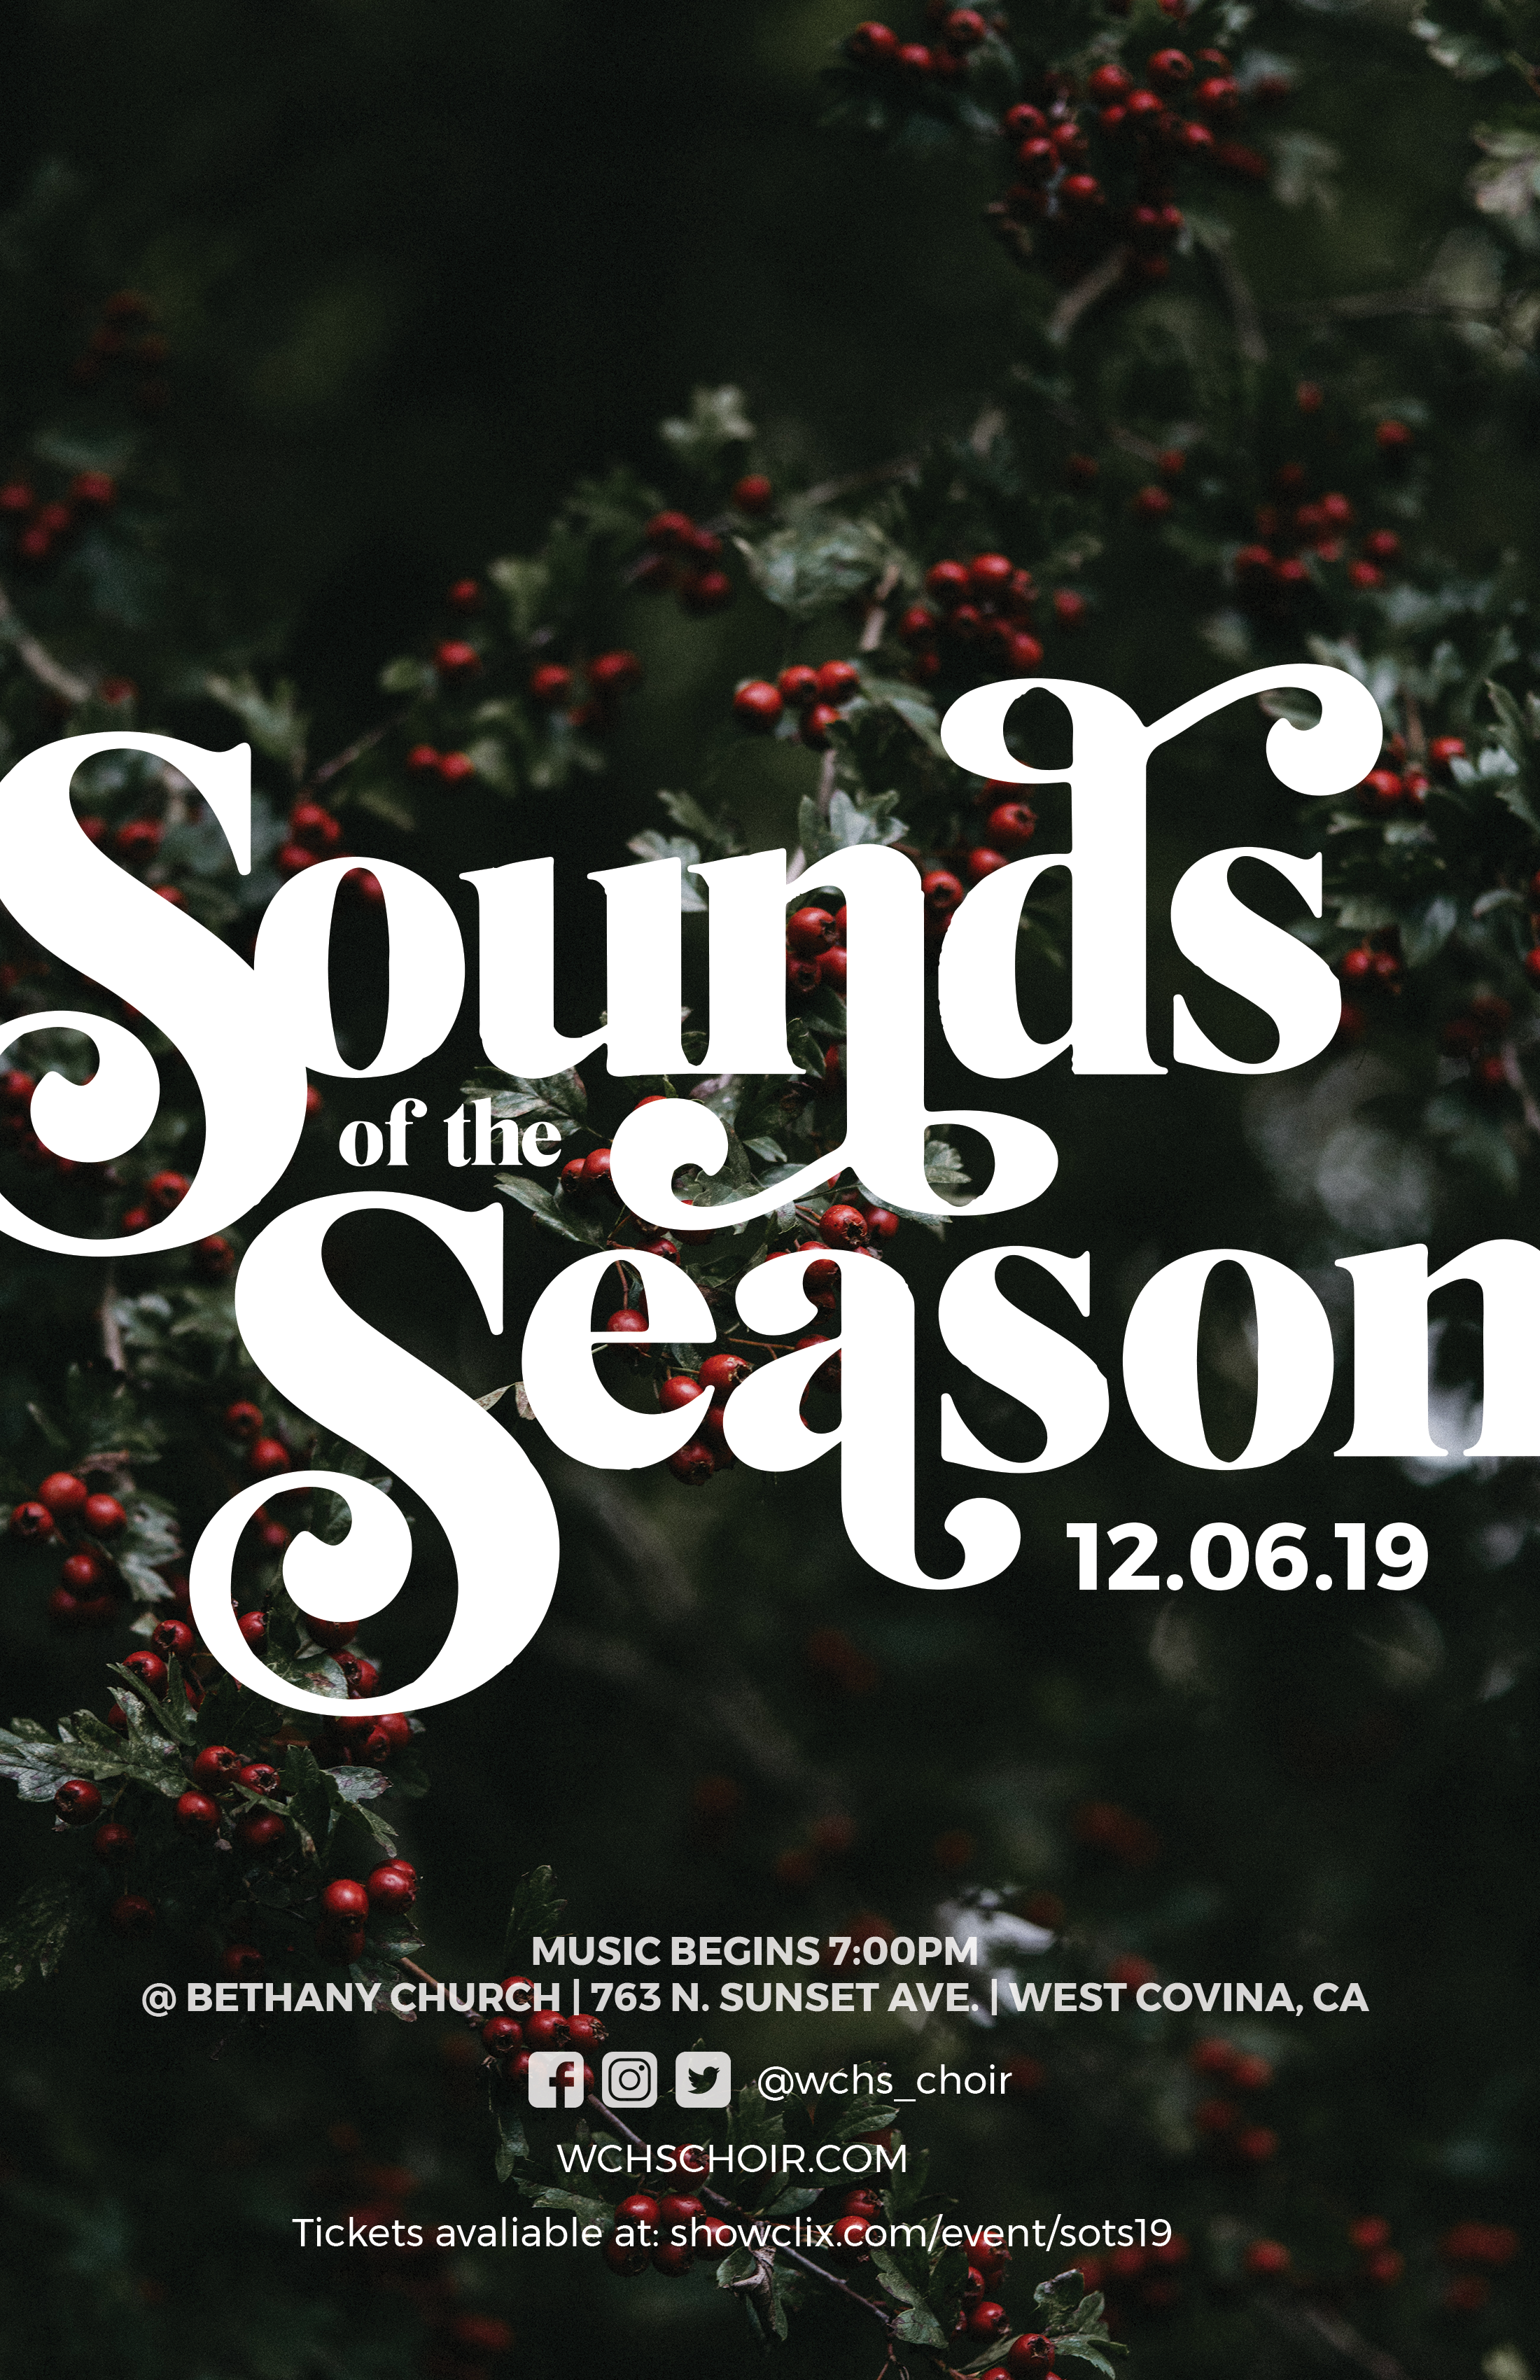 2019 Winter Concert - "Sounds of the Season"